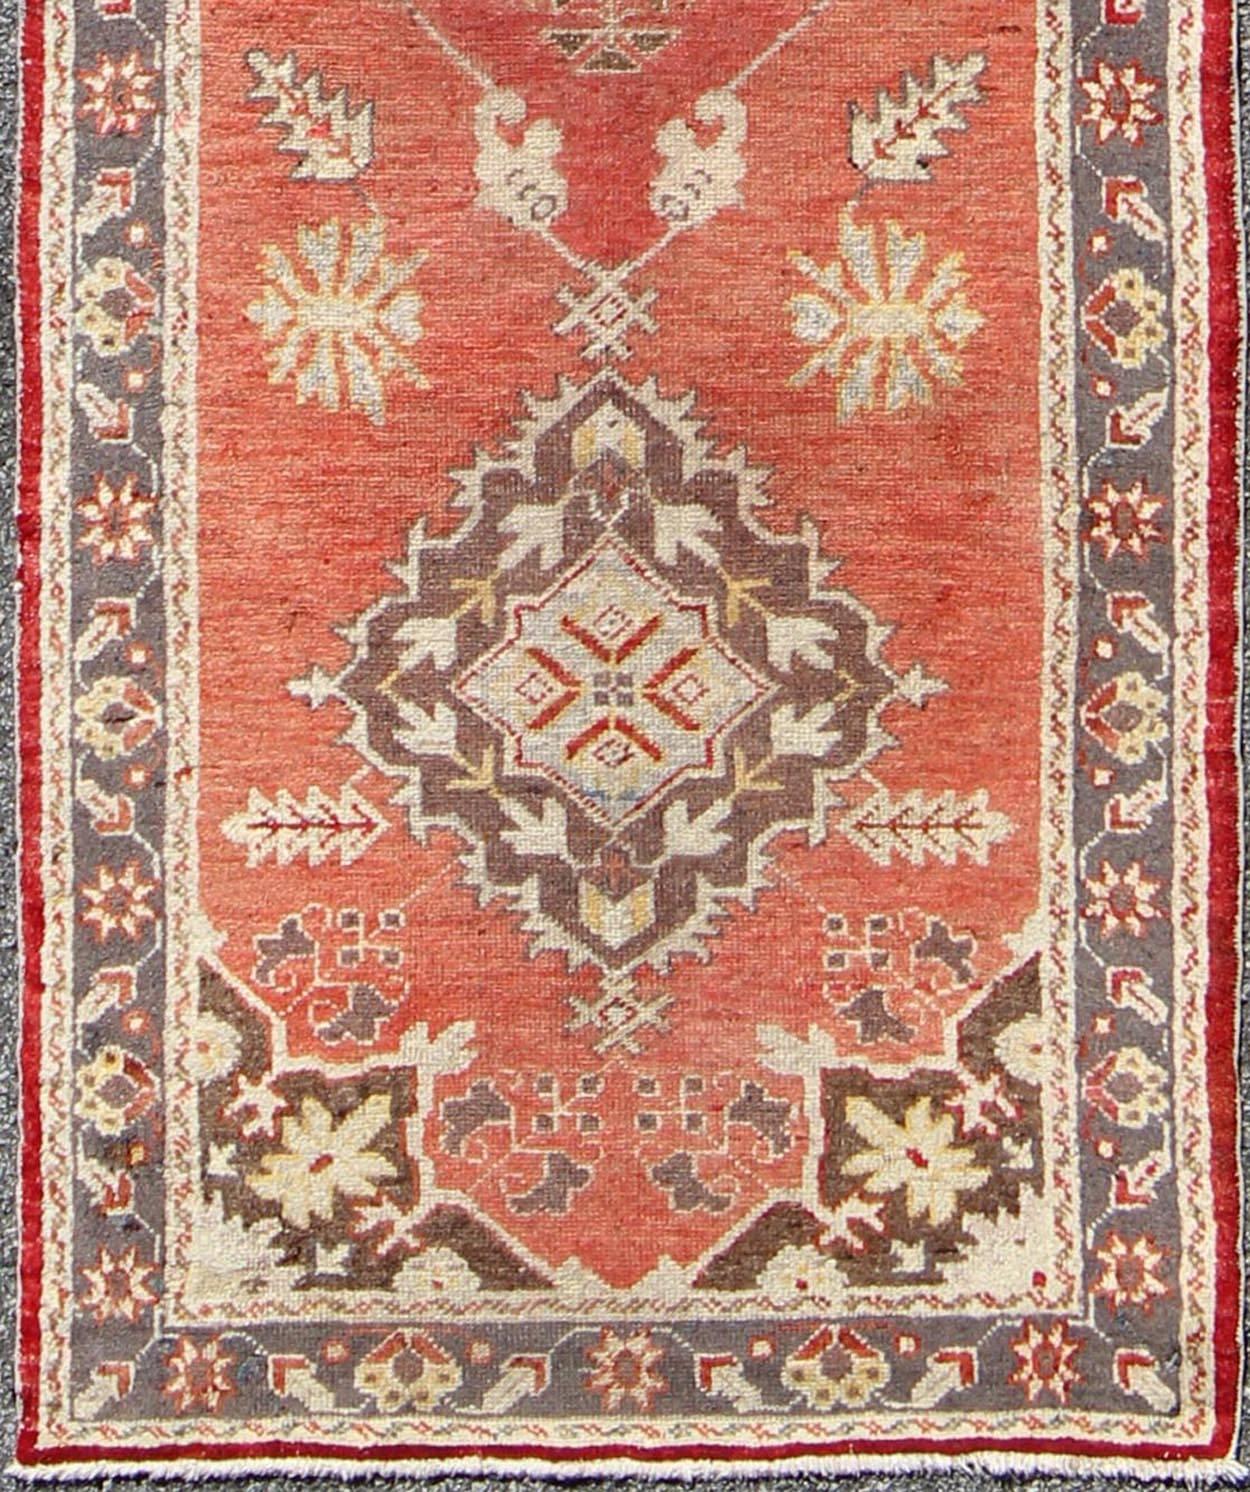 Red and grey Mid-Century vintage Turkish Oushak Runner with floral medallions, rug is 161, country of origin / type: Turkey / Oushak, circa mid-20th century.

This vintage Oushak runner features a unique blend of cheerful colors and an intricately